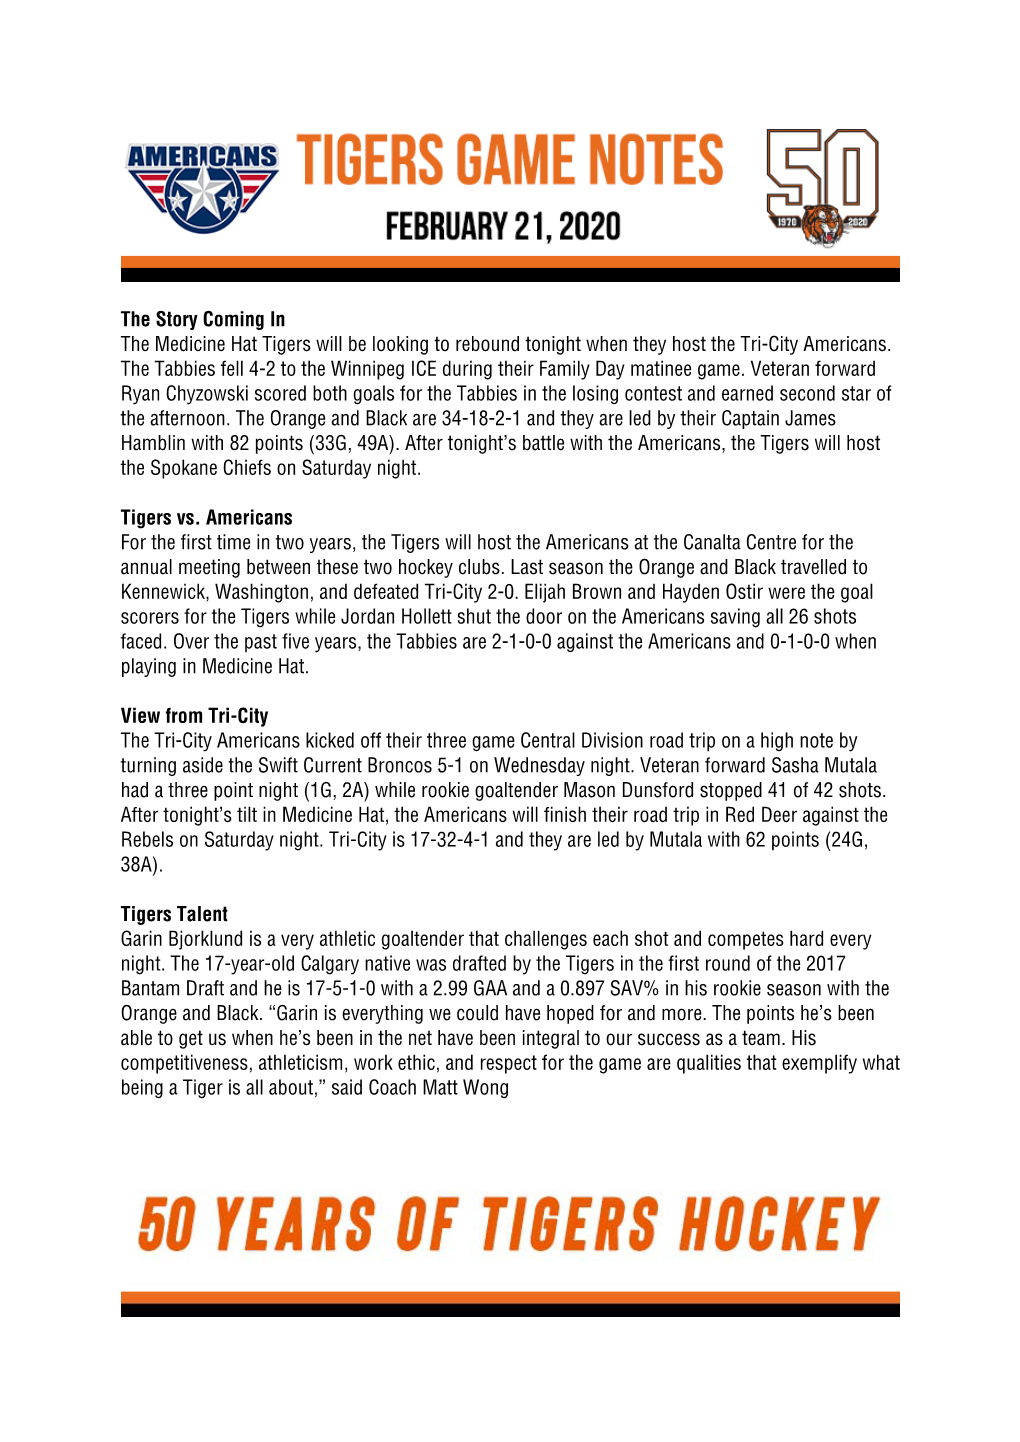 The Story Coming in the Medicine Hat Tigers Will Be Looking to Rebound Tonight When They Host the Tri-City Americans